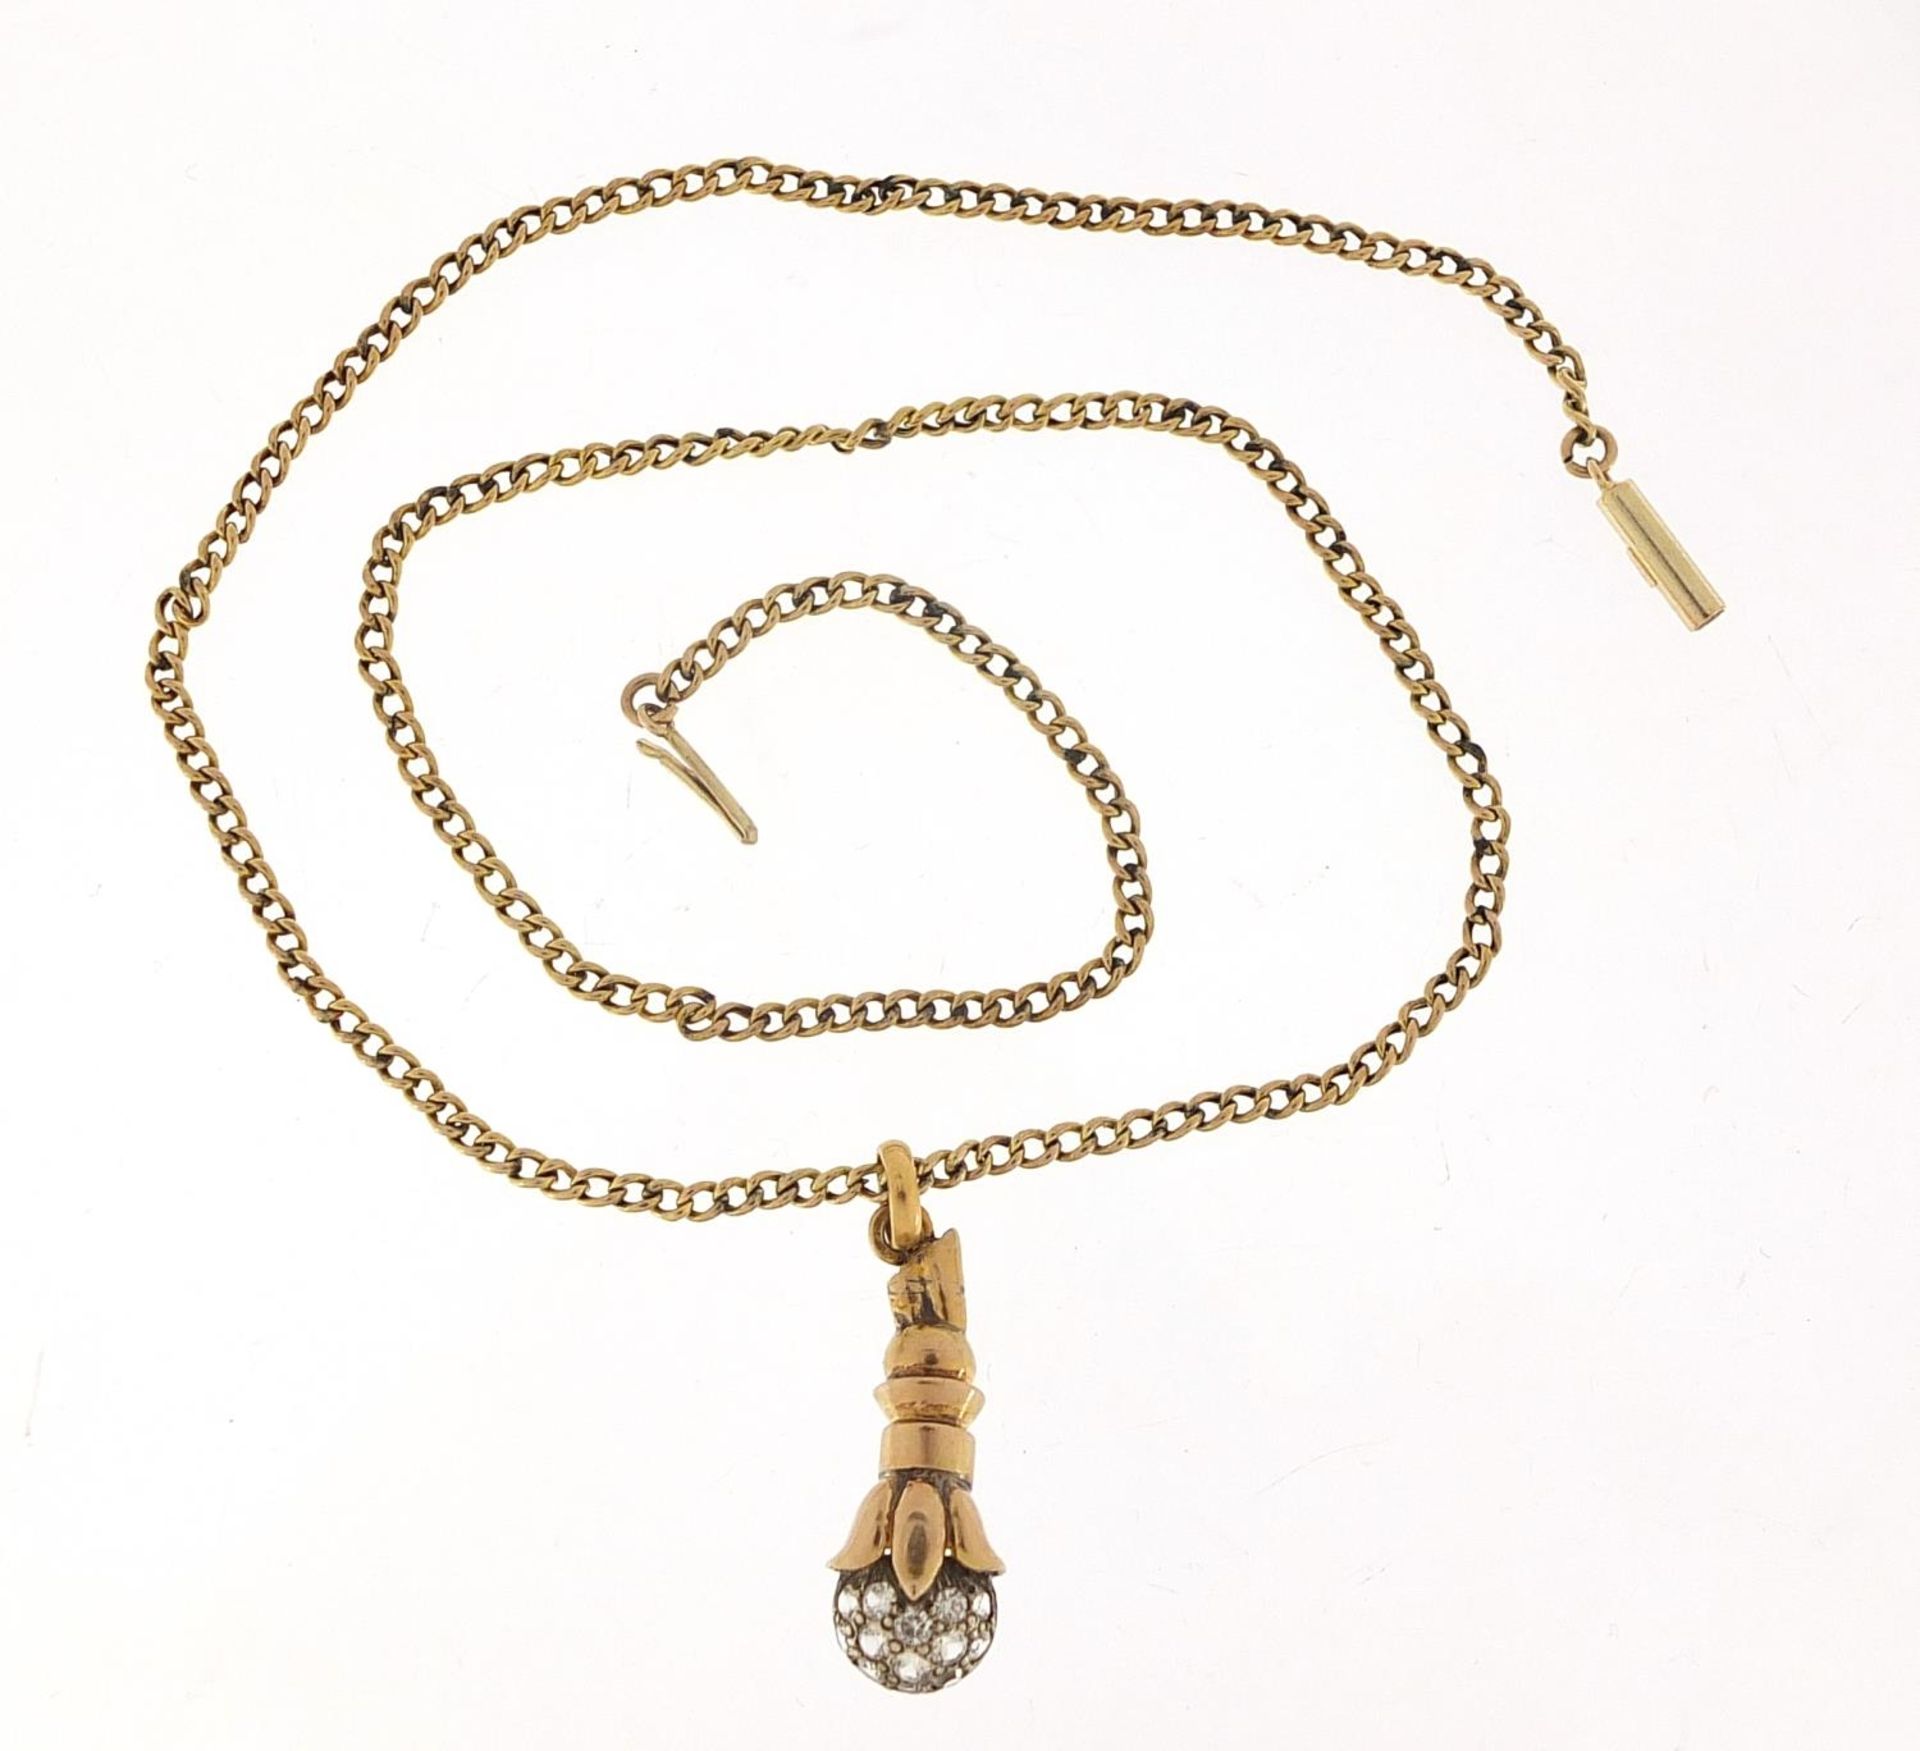 Unmarked gold white sapphire pendant on a 9ct gold necklace, 2.5cm high and 40cm in length, the - Image 3 of 5